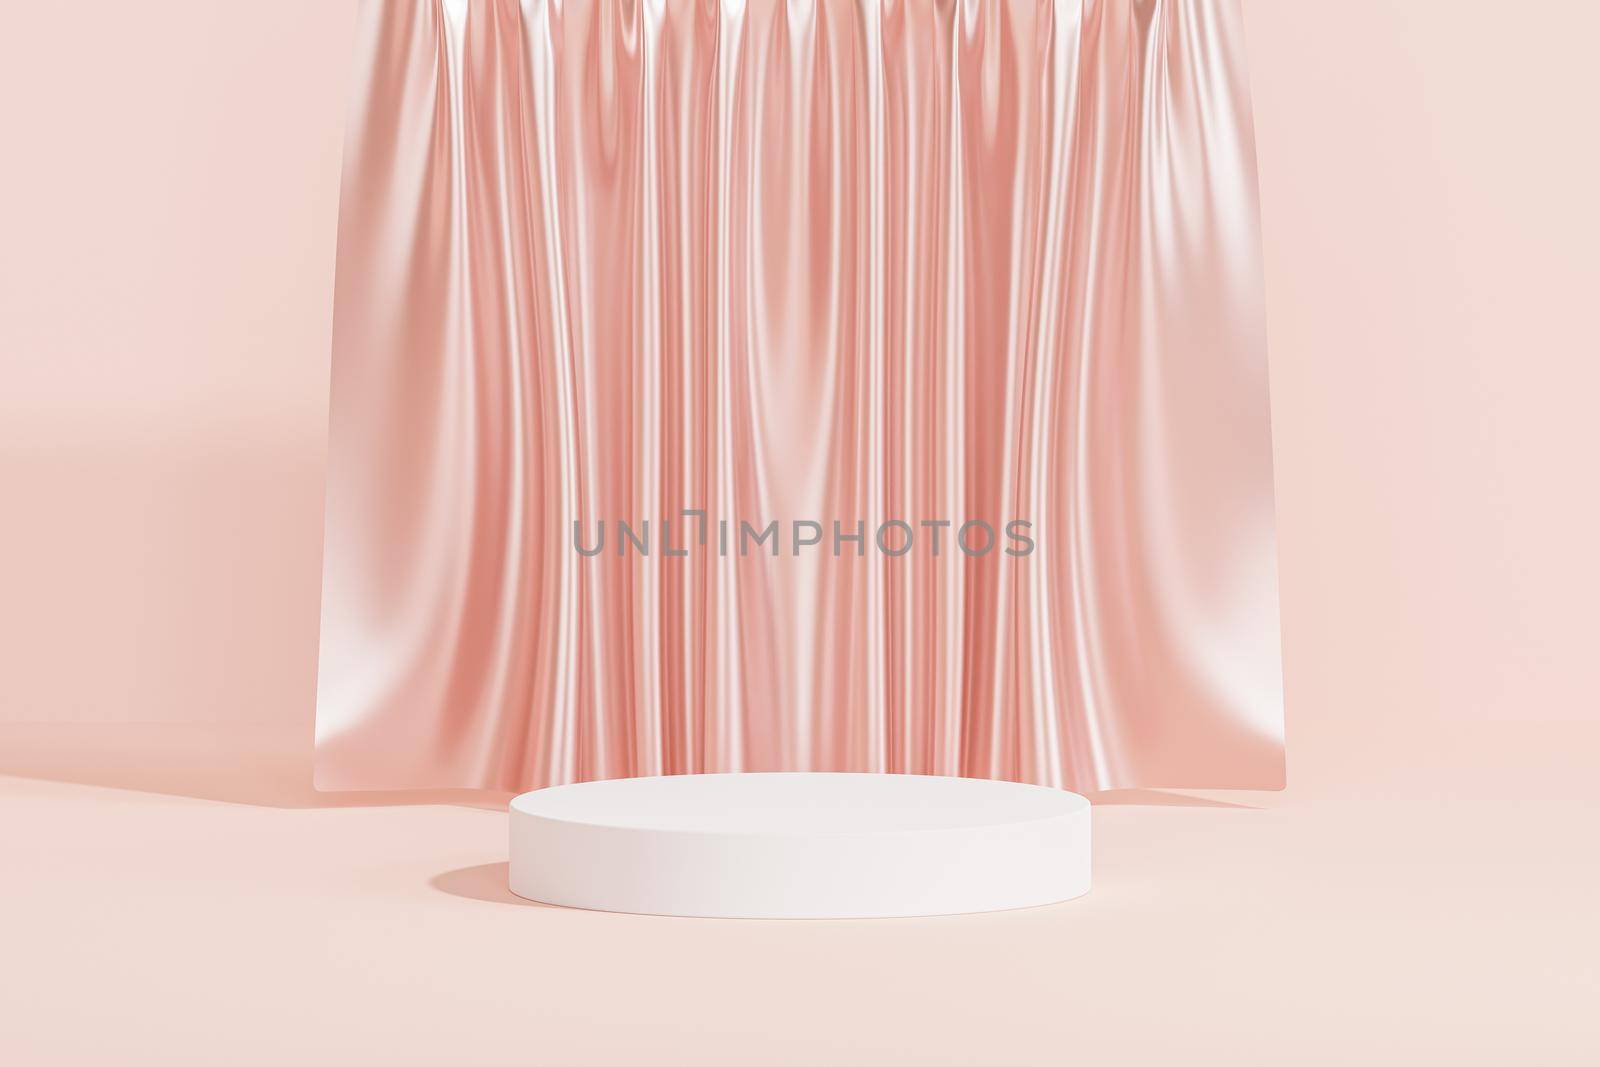 White podium or pedestal for products or advertising on pink background with curtains, 3d render